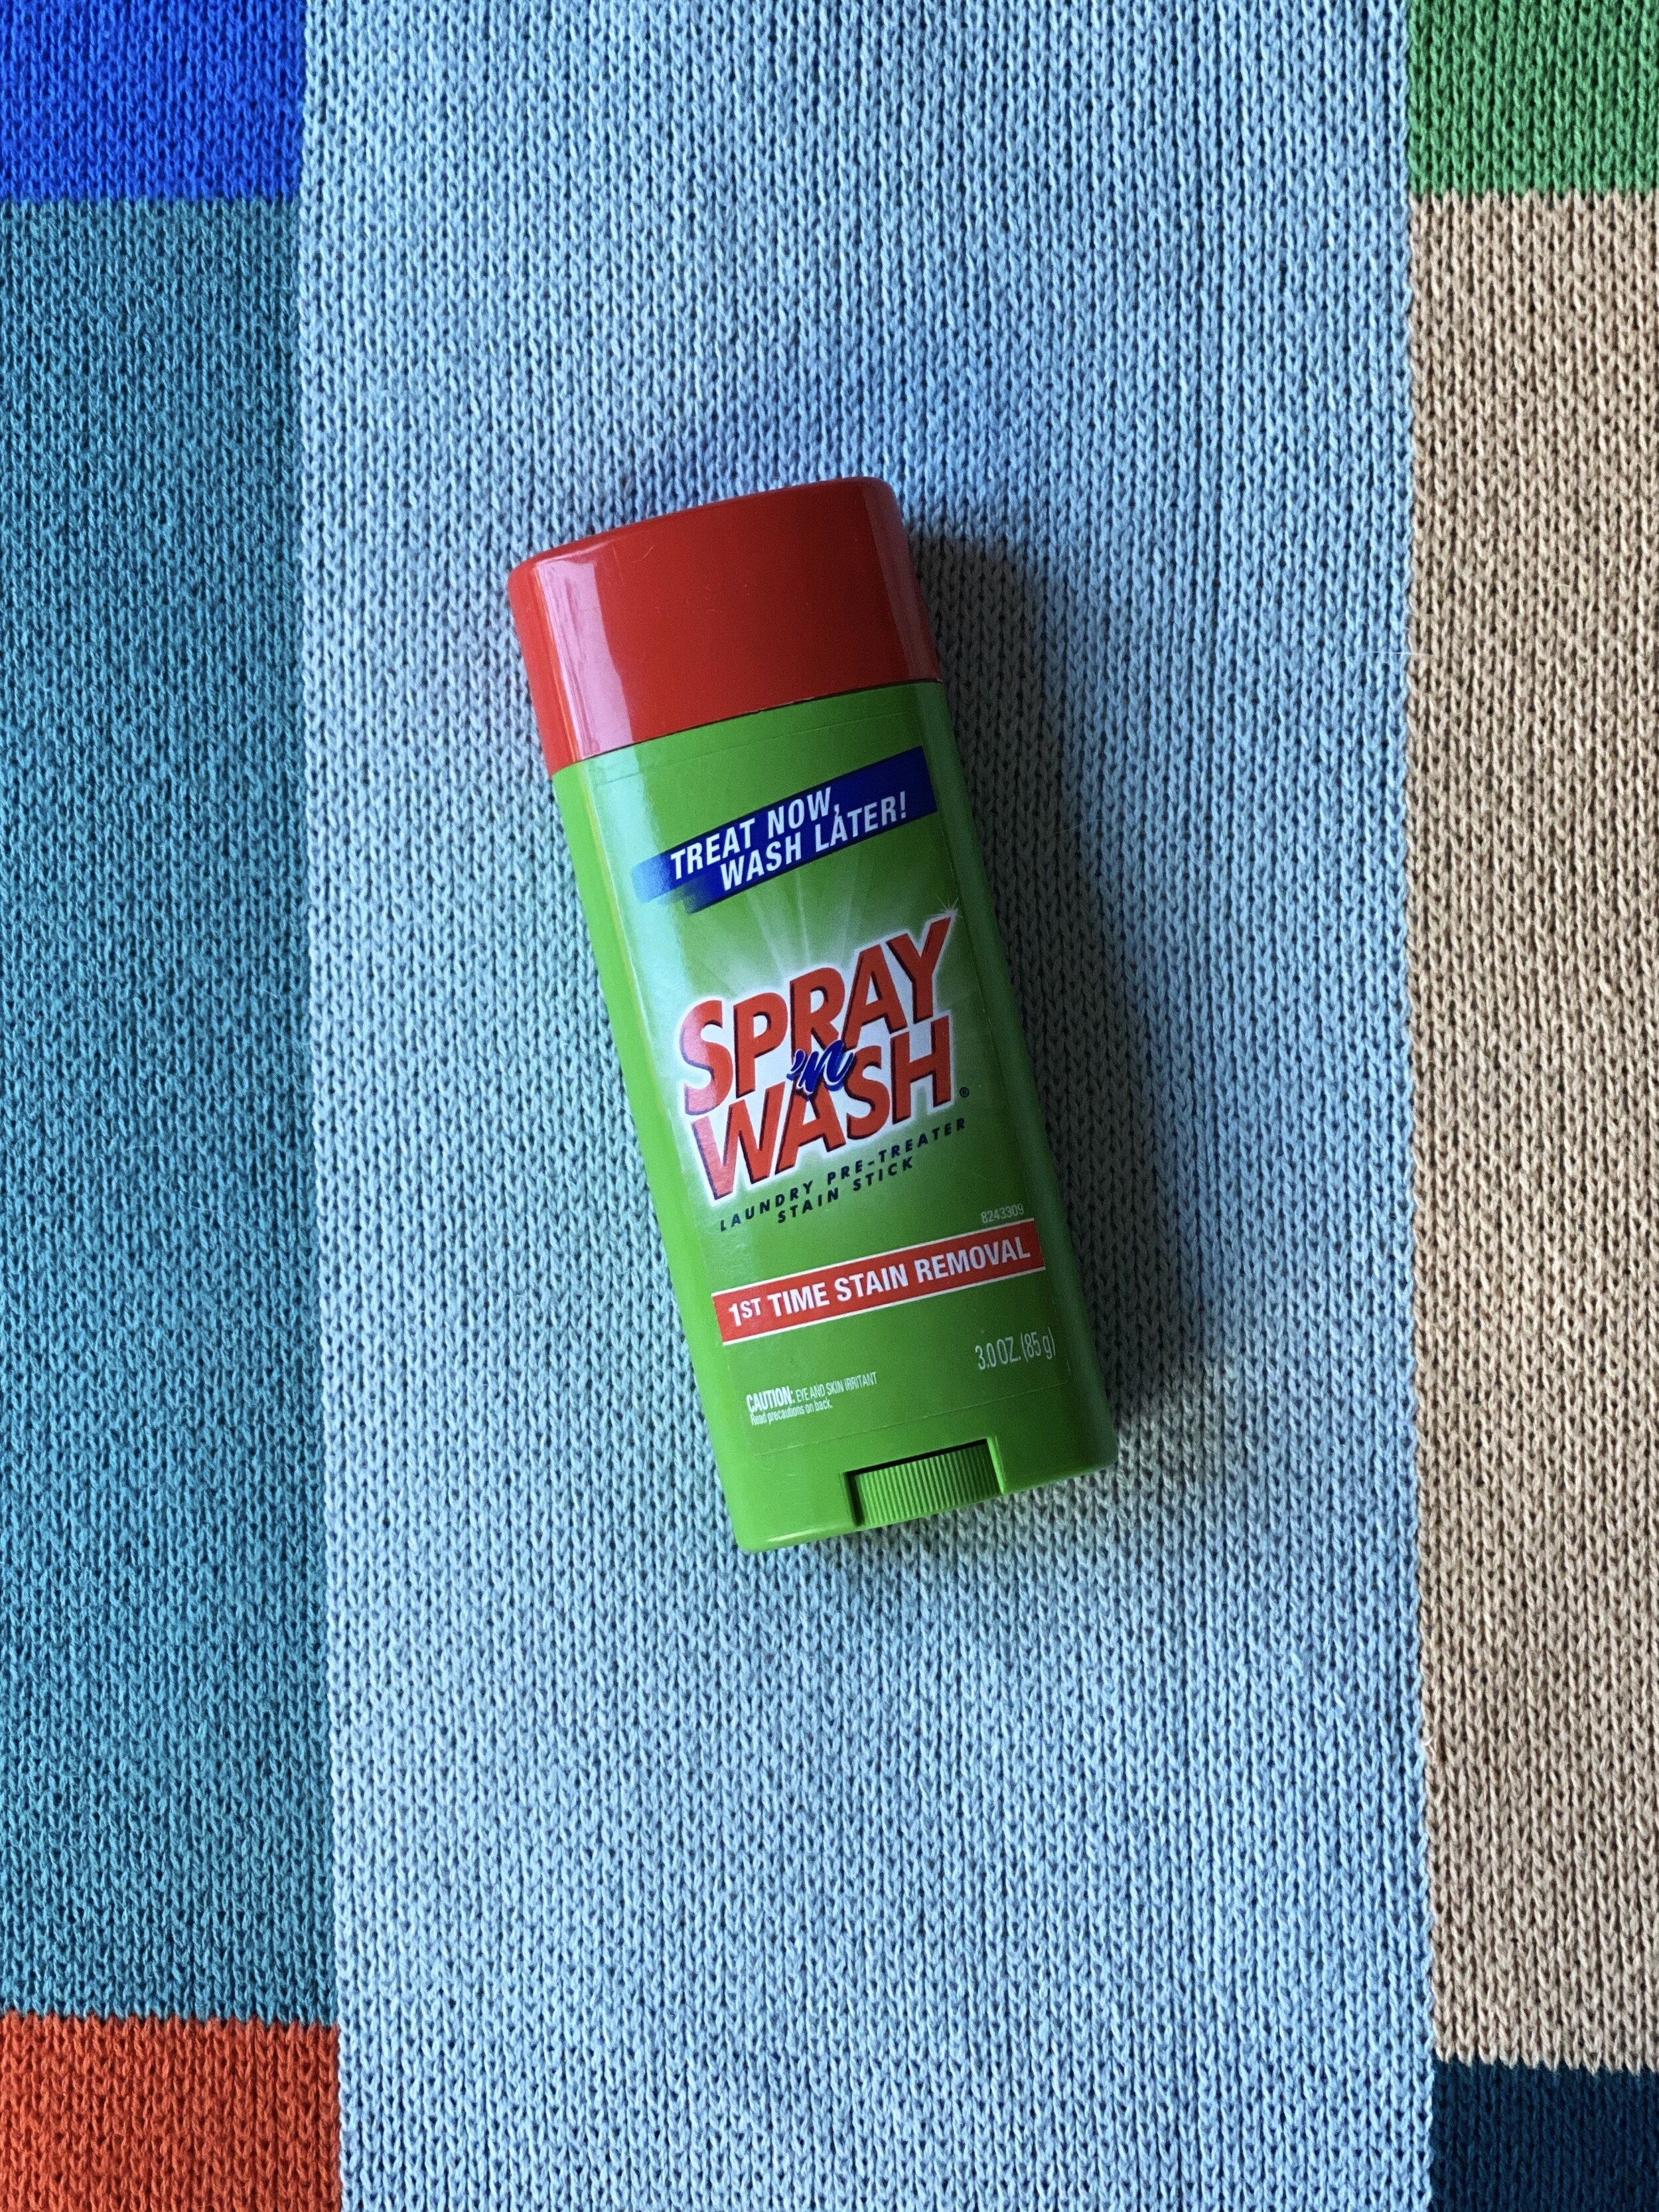 An ode to the two best stain removers: OxiClean and Spray 'n Wash